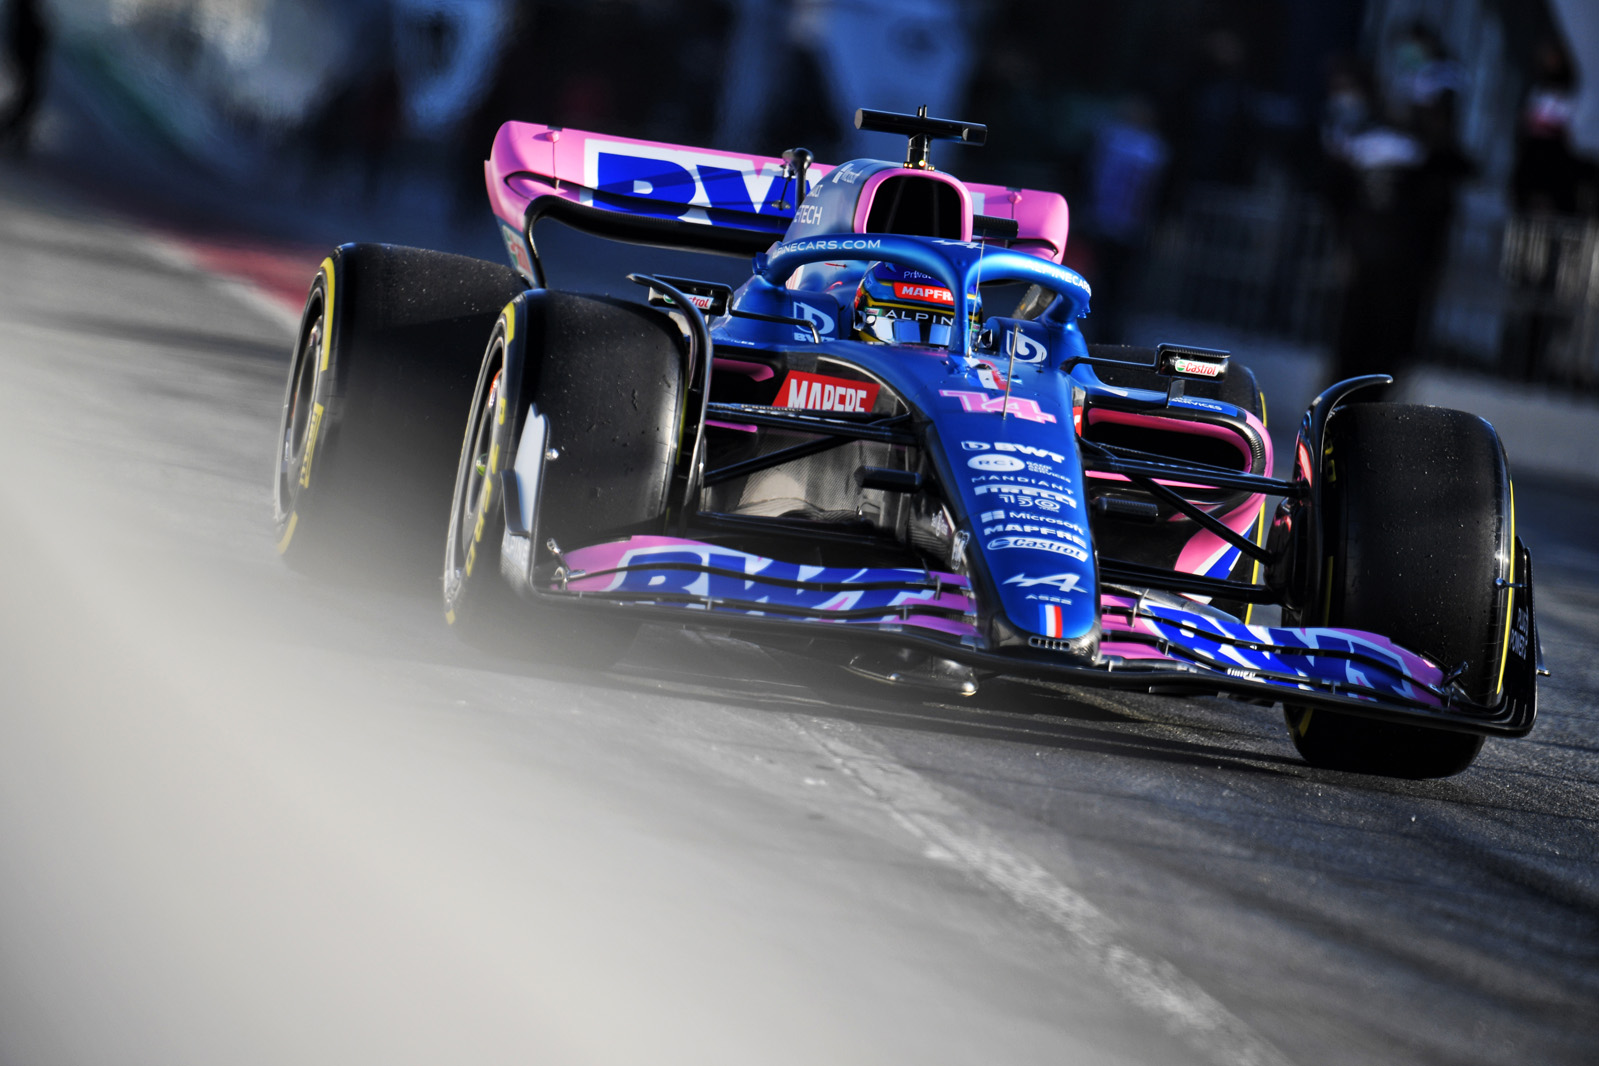 Faster data, faster car: How BWT Alpine F1 Team aims to lead the Formula 1  tech race - Source